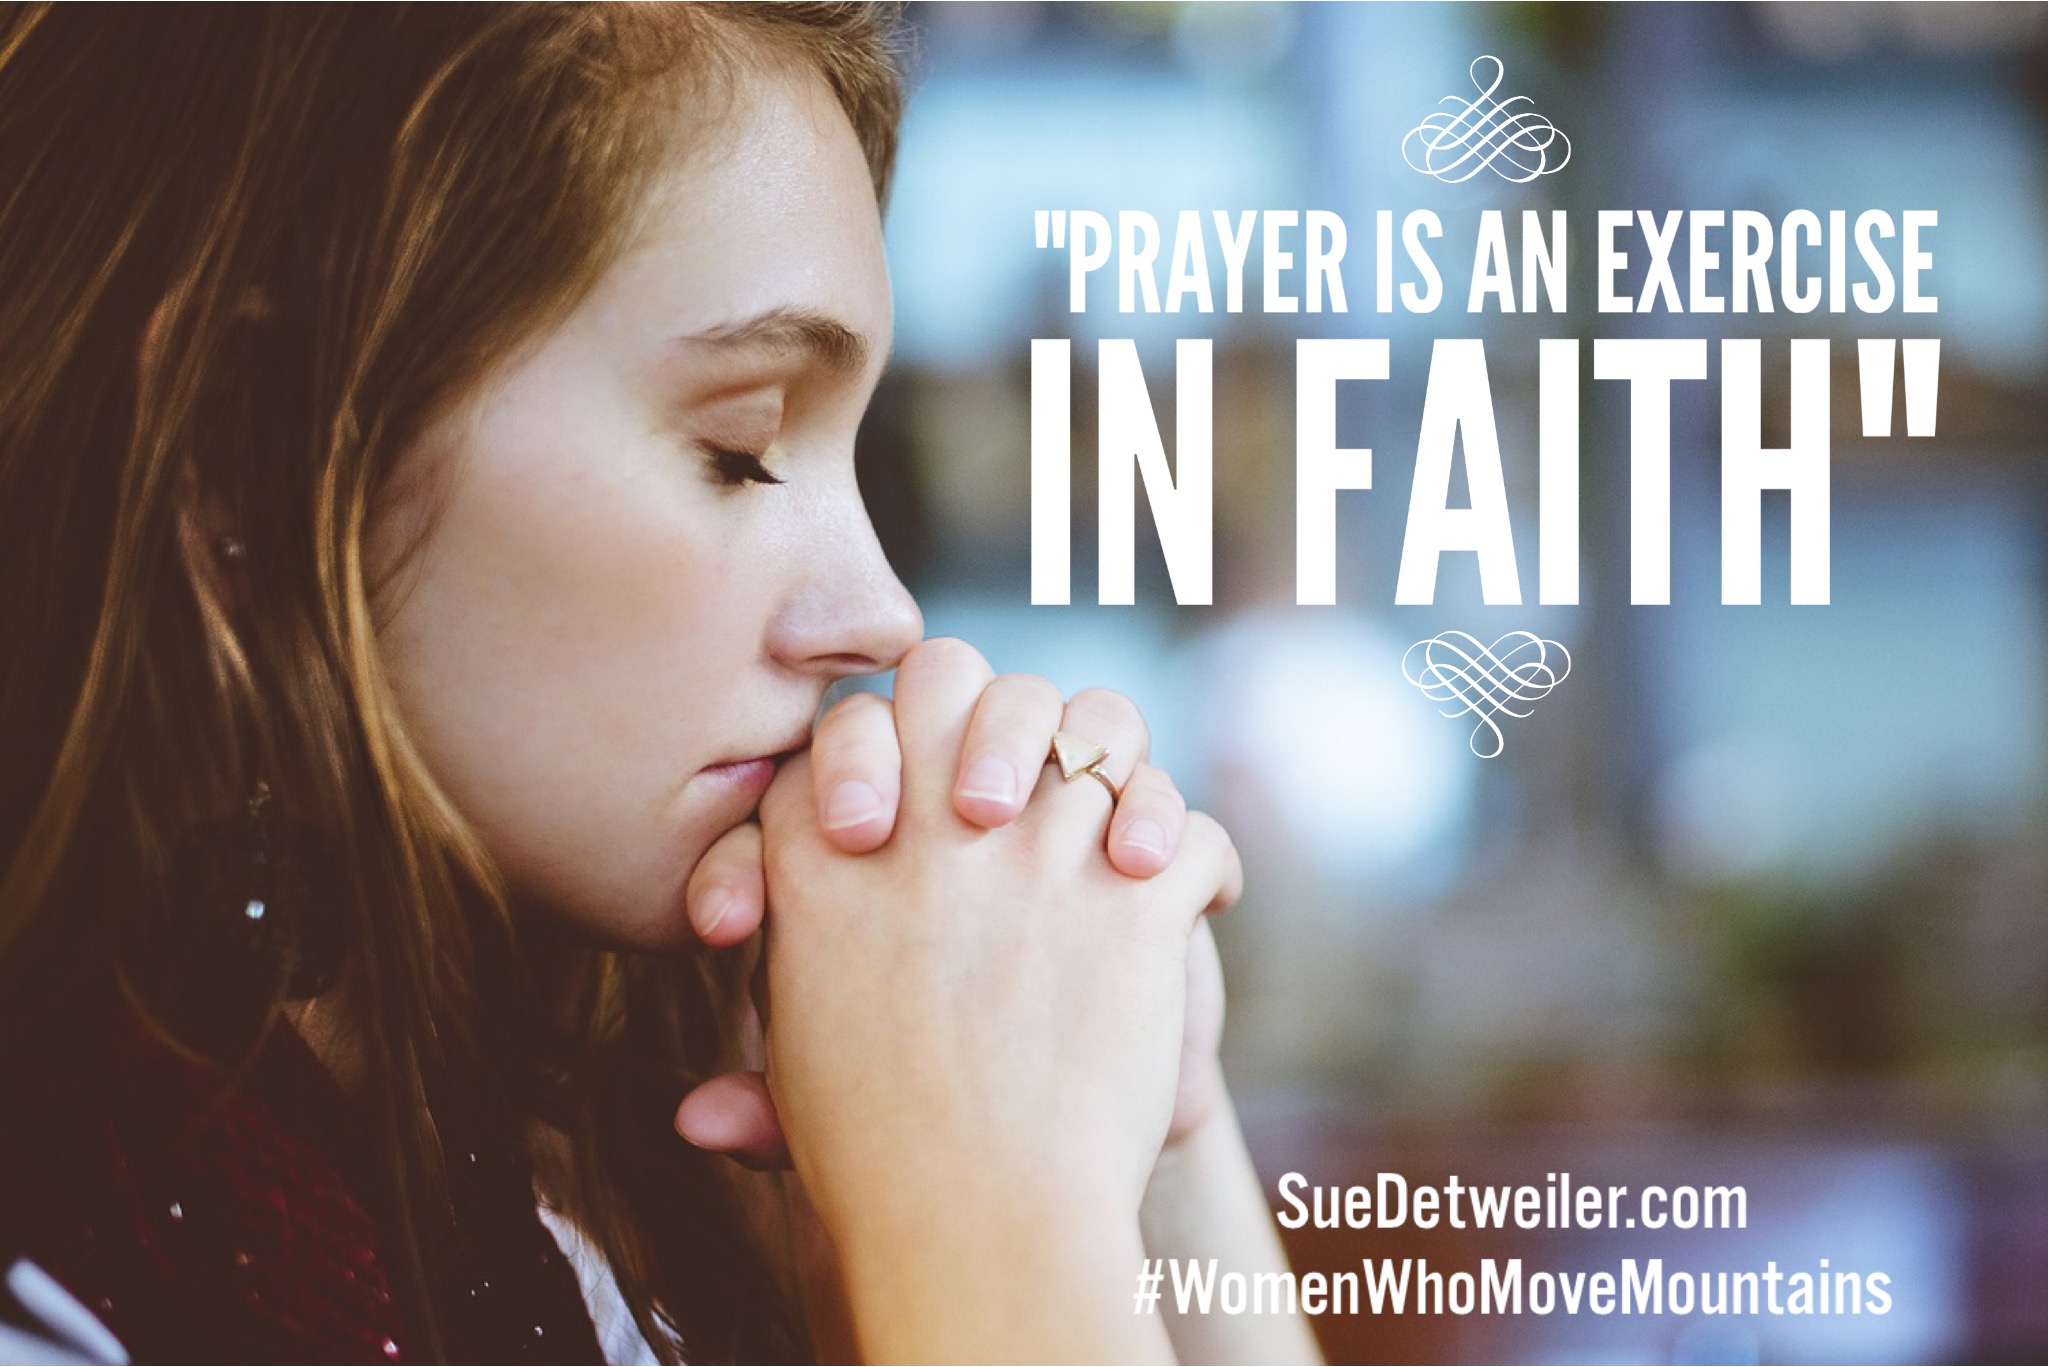 Women Who move mountains in prayer